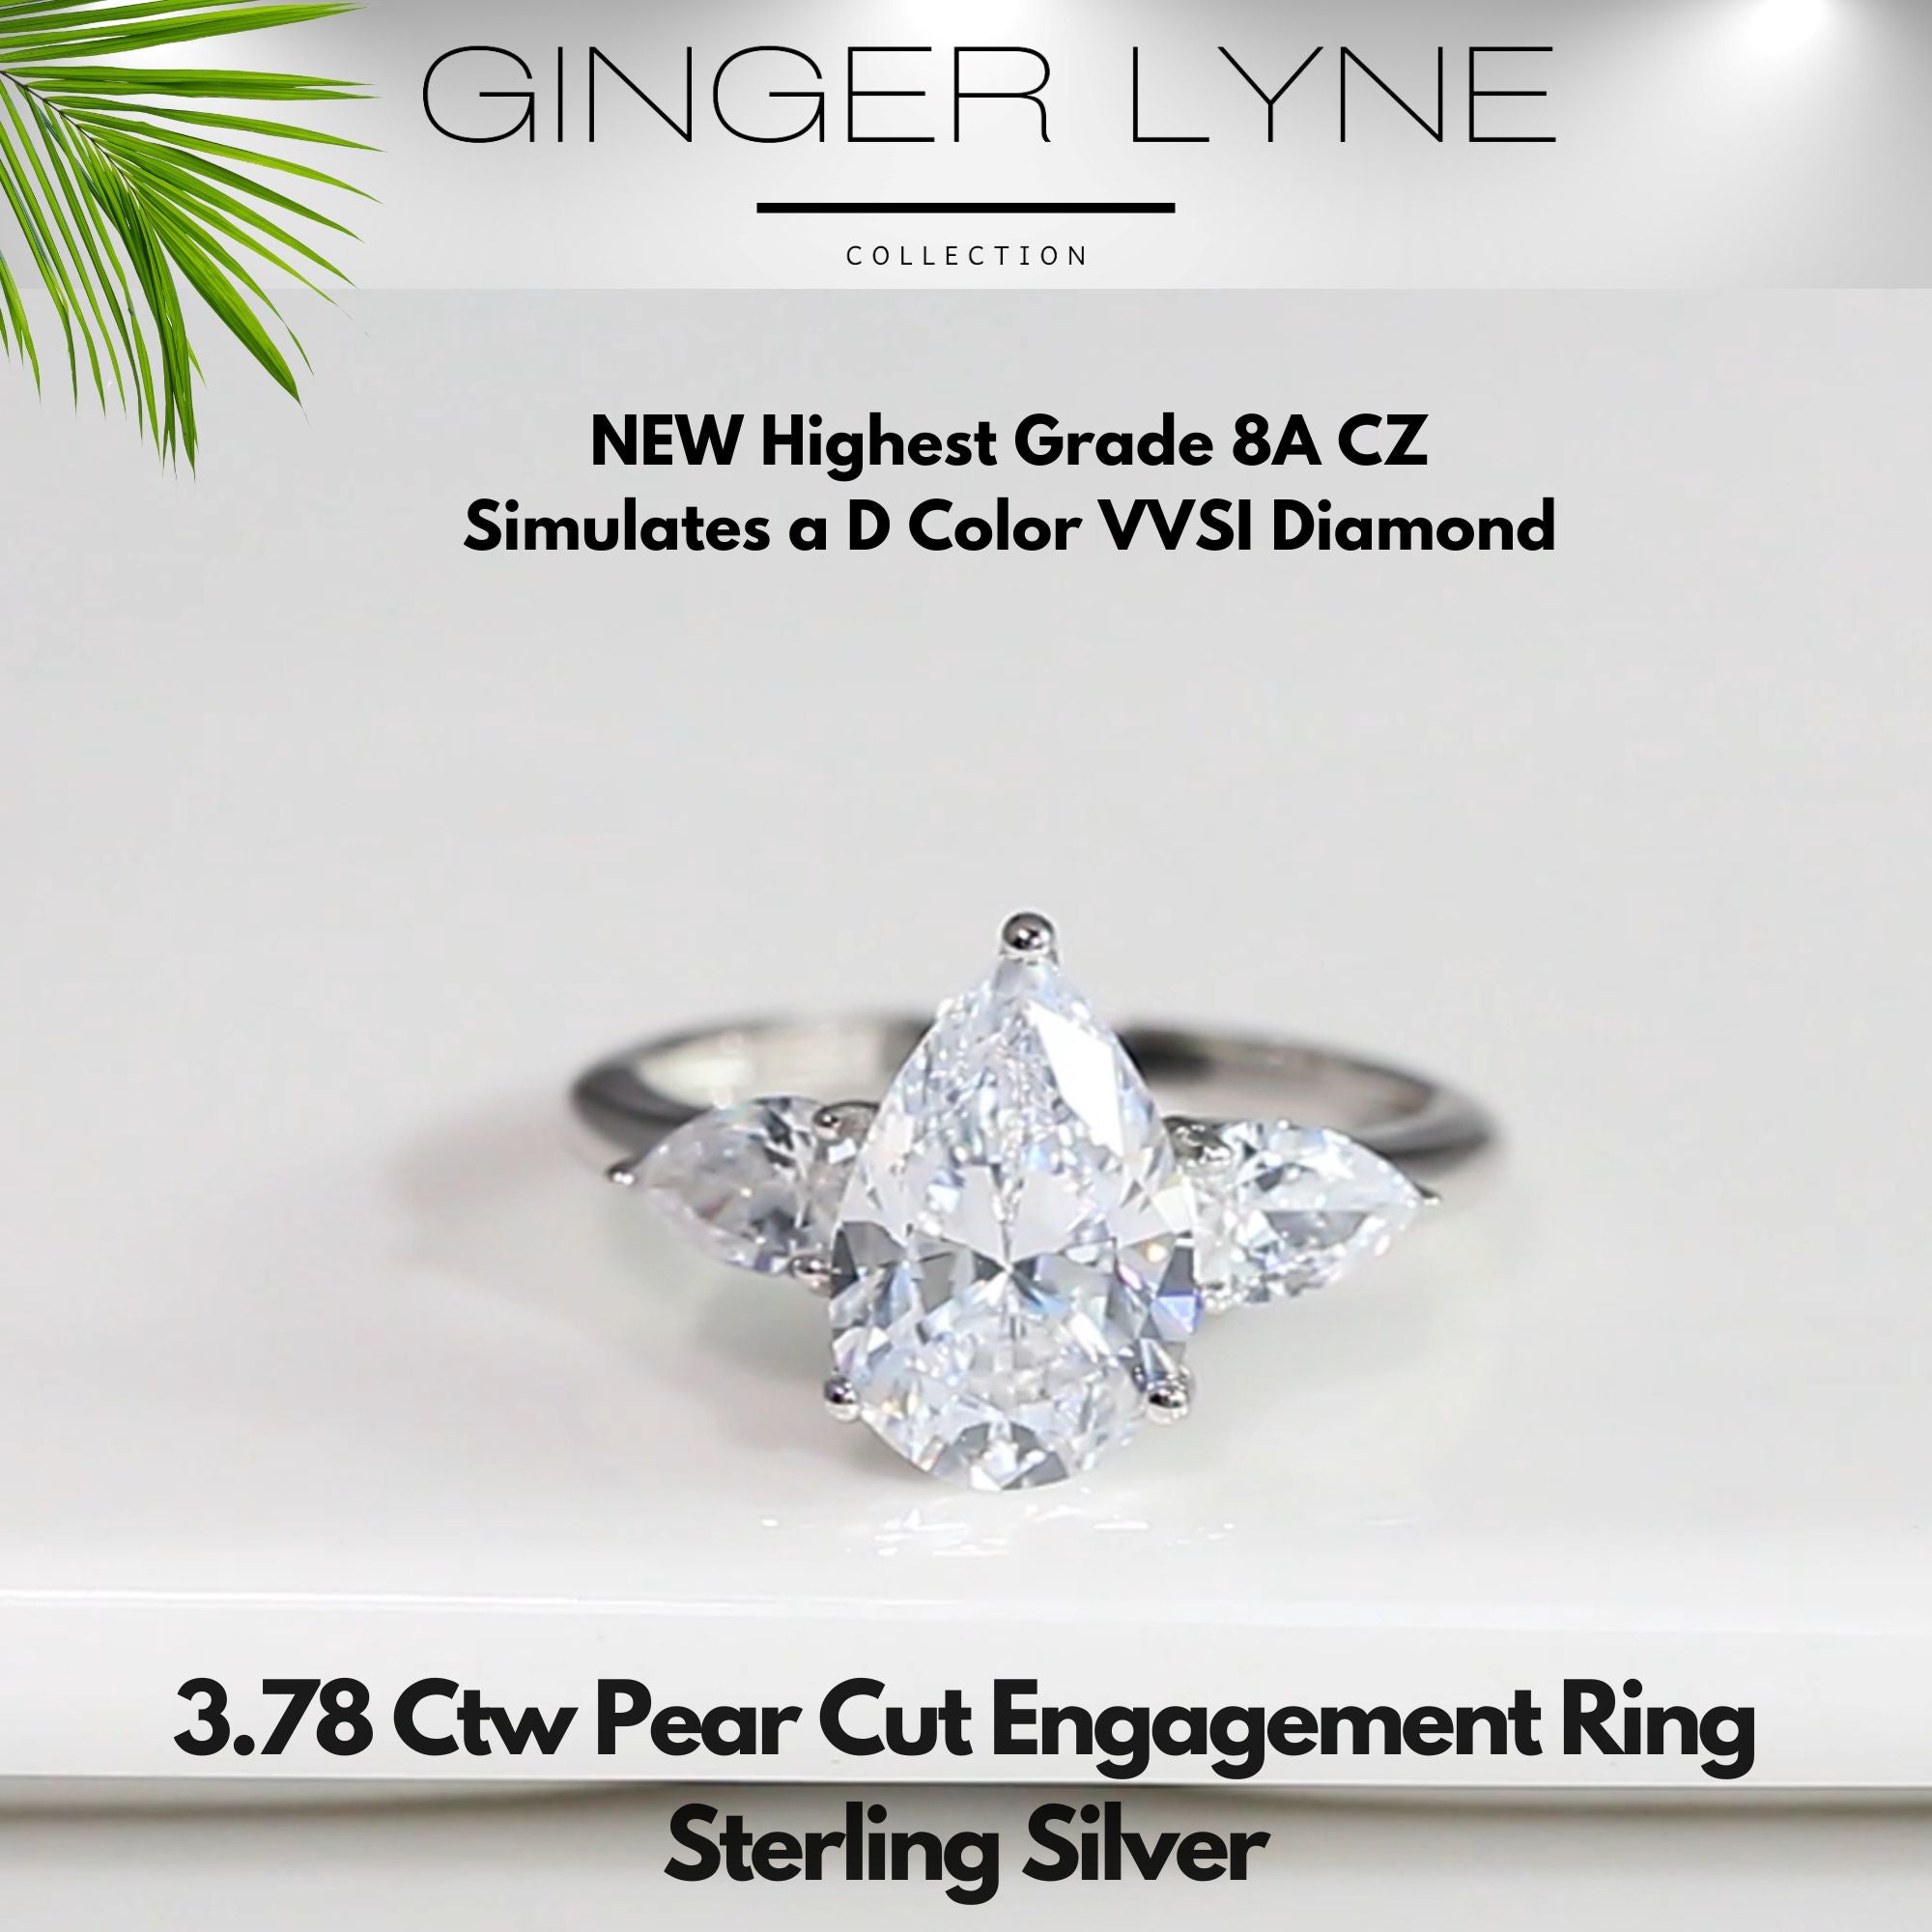 Pear Engagement Ring for Women by Ginger Lyne 3.78 Ct Simulated Diamond Sterling Silver Wedding Rings - 6